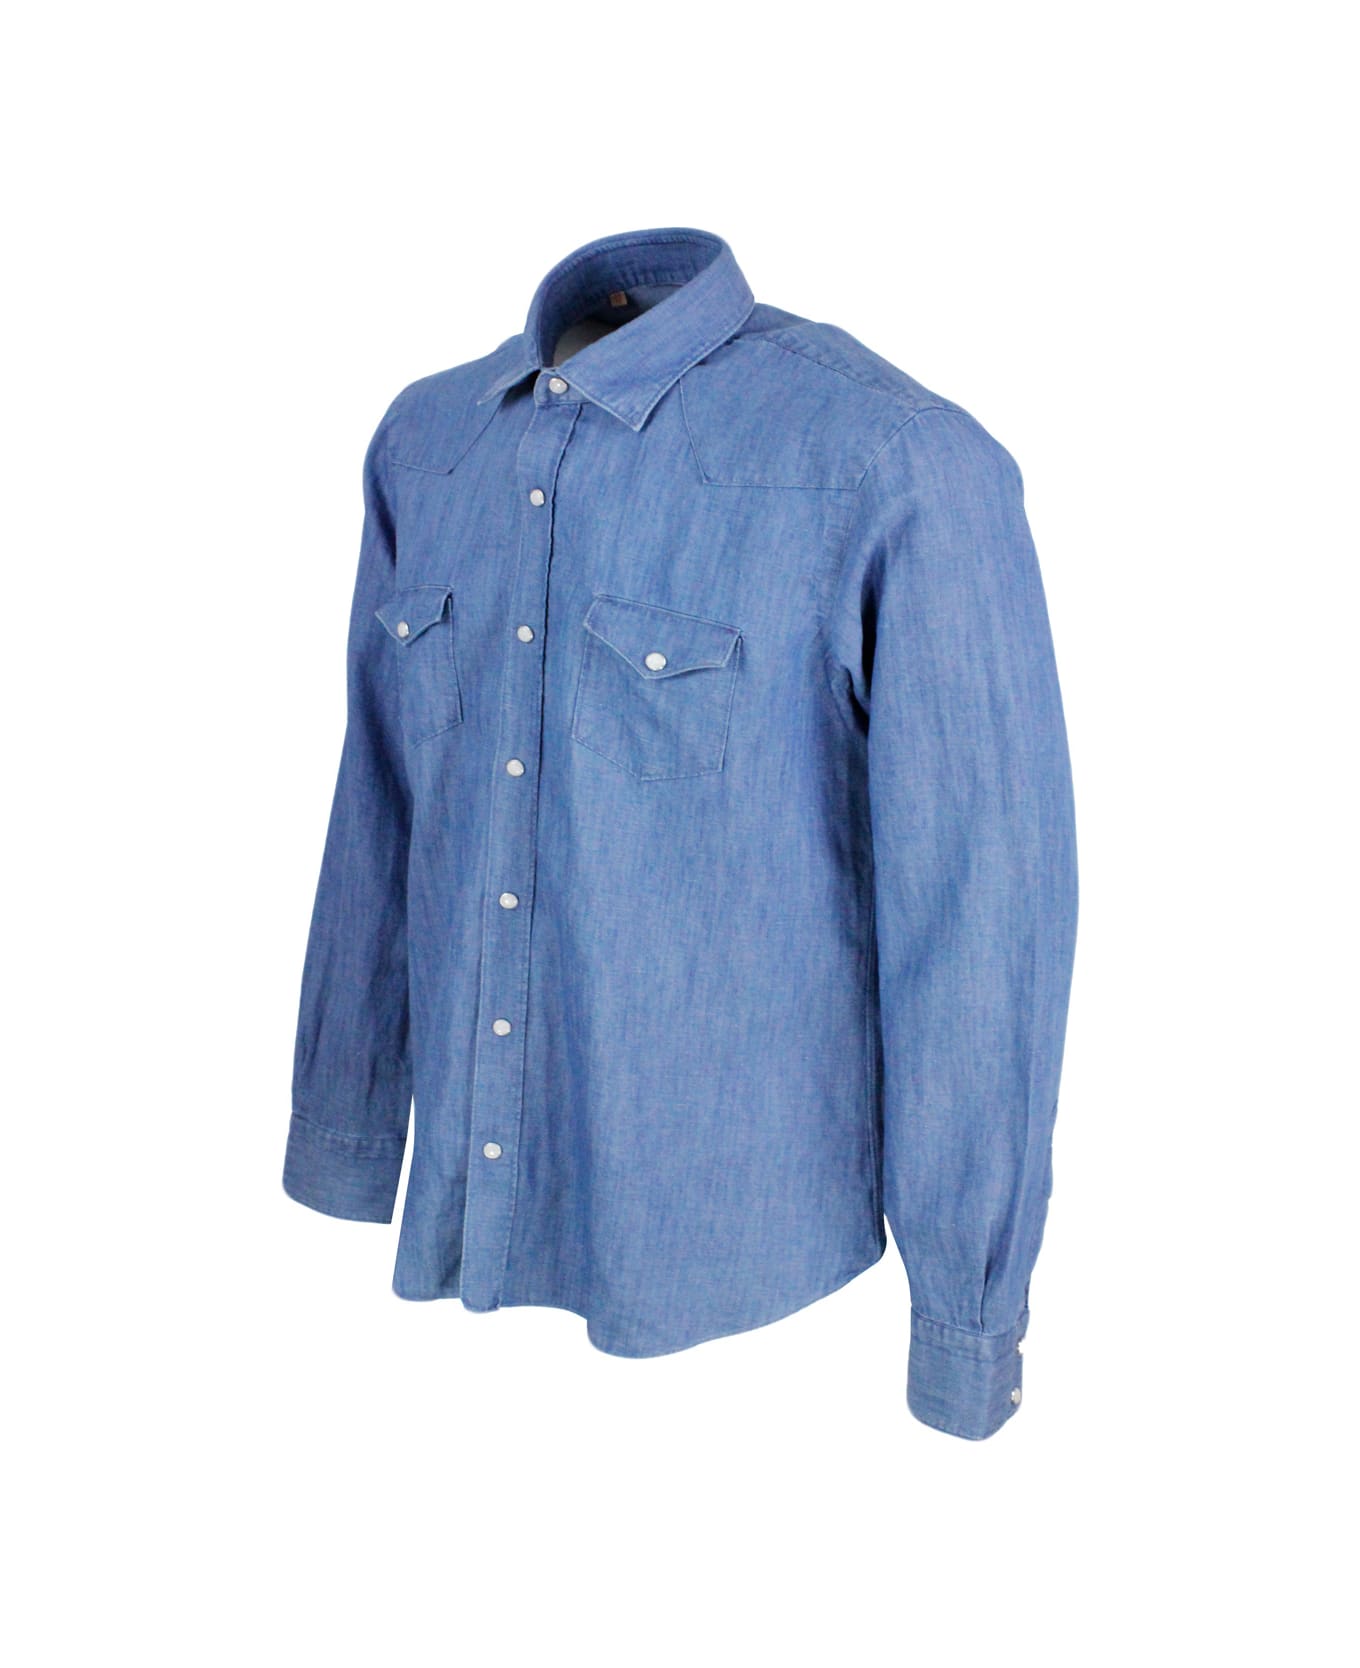 Barba Napoli Dandylife Shirt In Light Denim With Hand-stitched Italian Collar And Front Pocket Counters. The Buttons Are In Mother-of-pearl Snaps - Denim